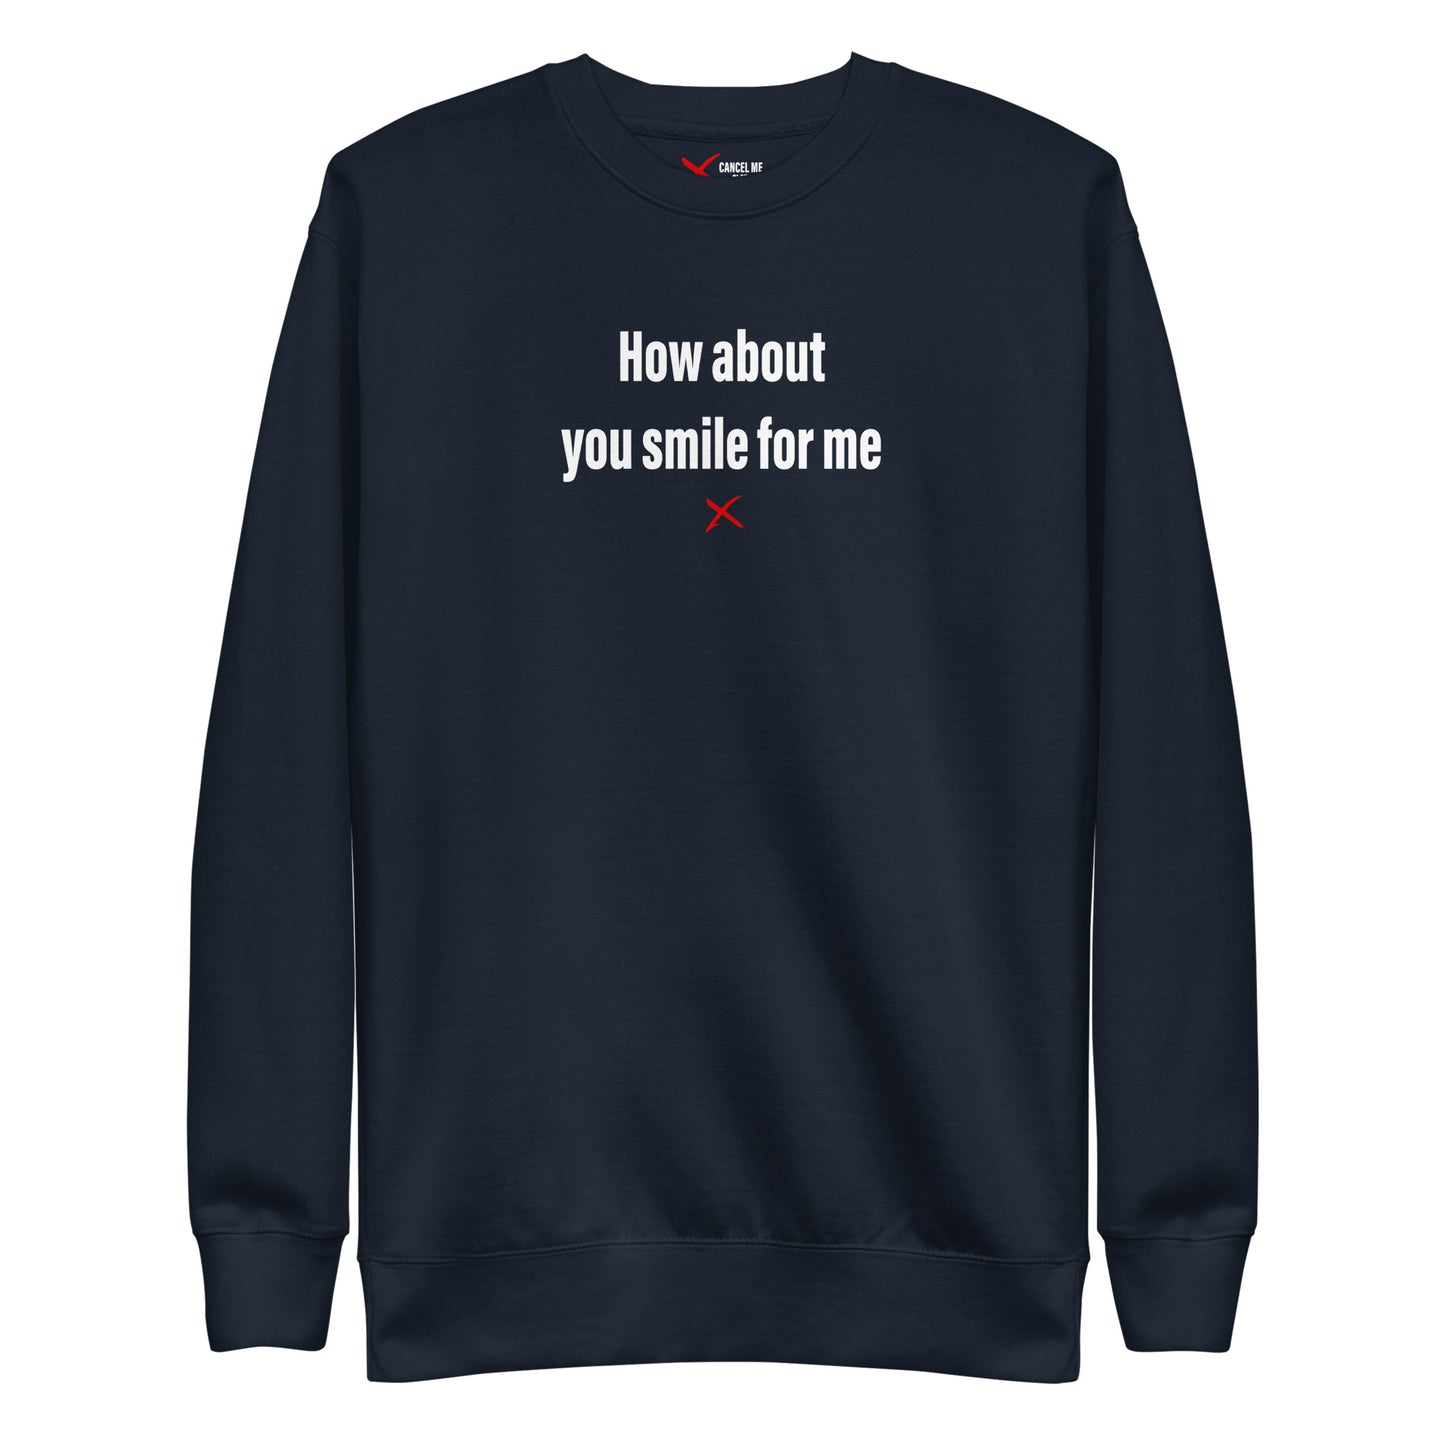 How about you smile for me - Sweatshirt